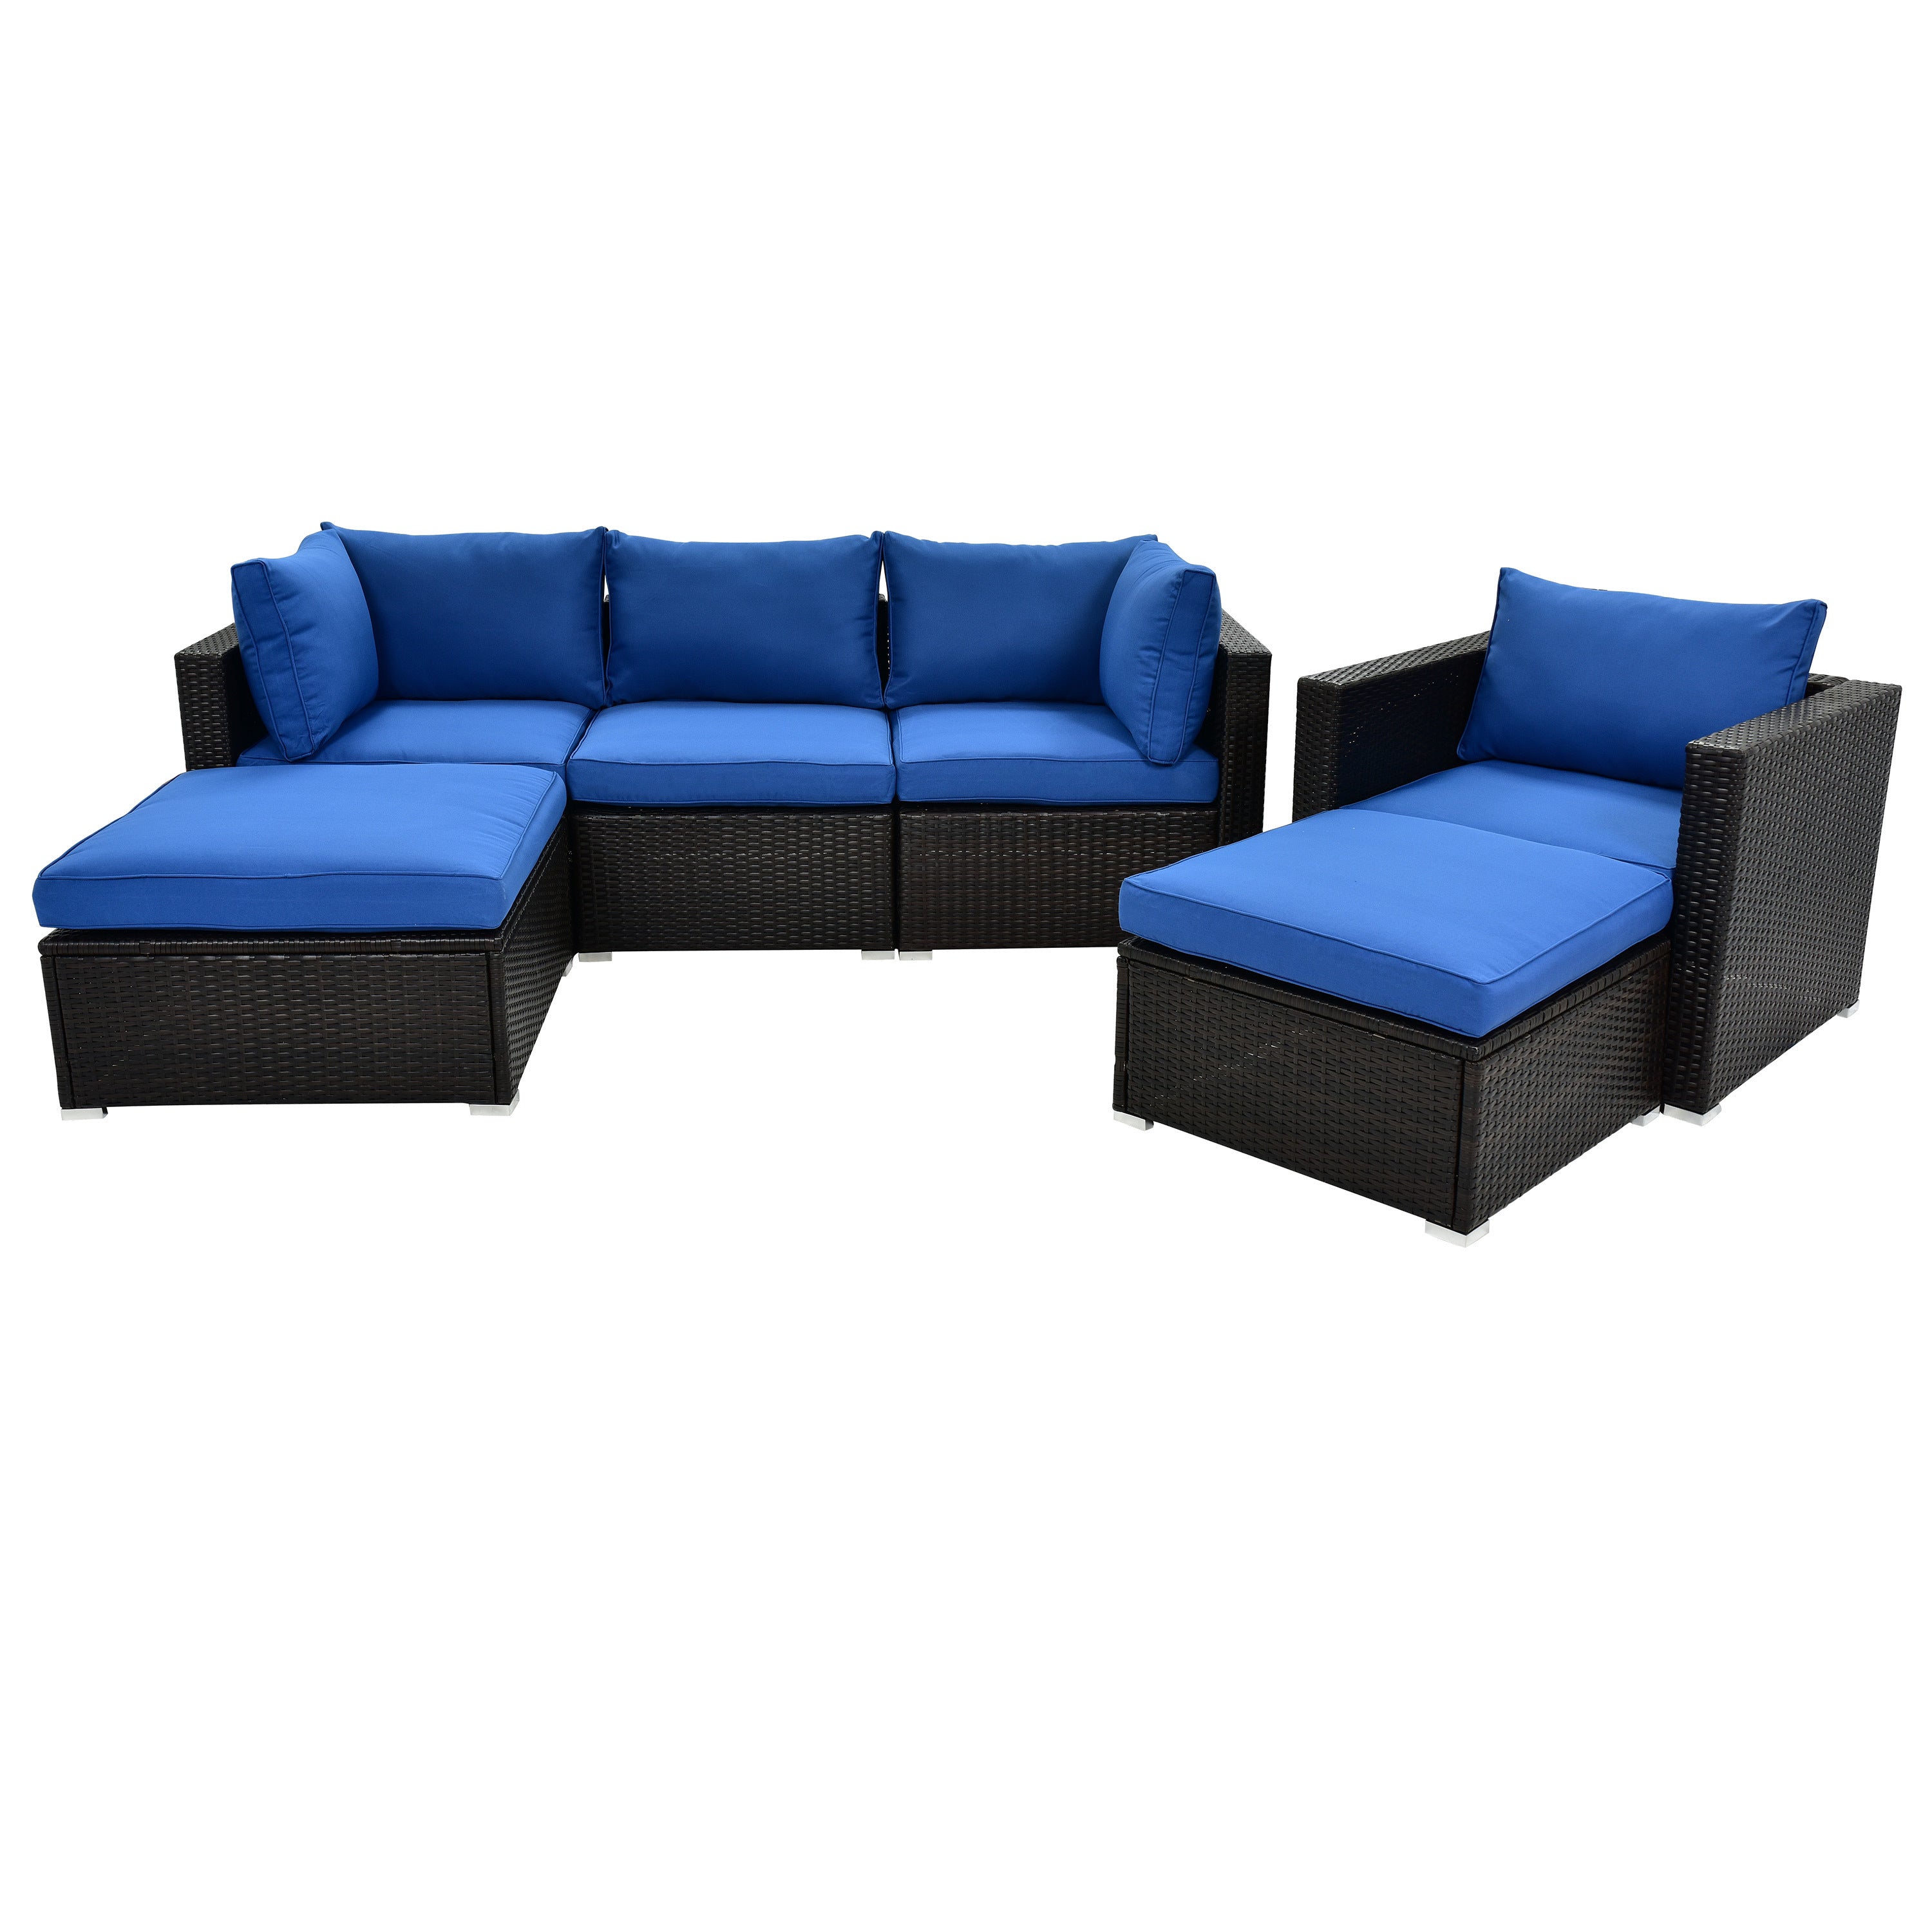 6 Pcs Outdoor Sectional Sofa Set with Glass Table, Blue Cushion+ Brown Wicker